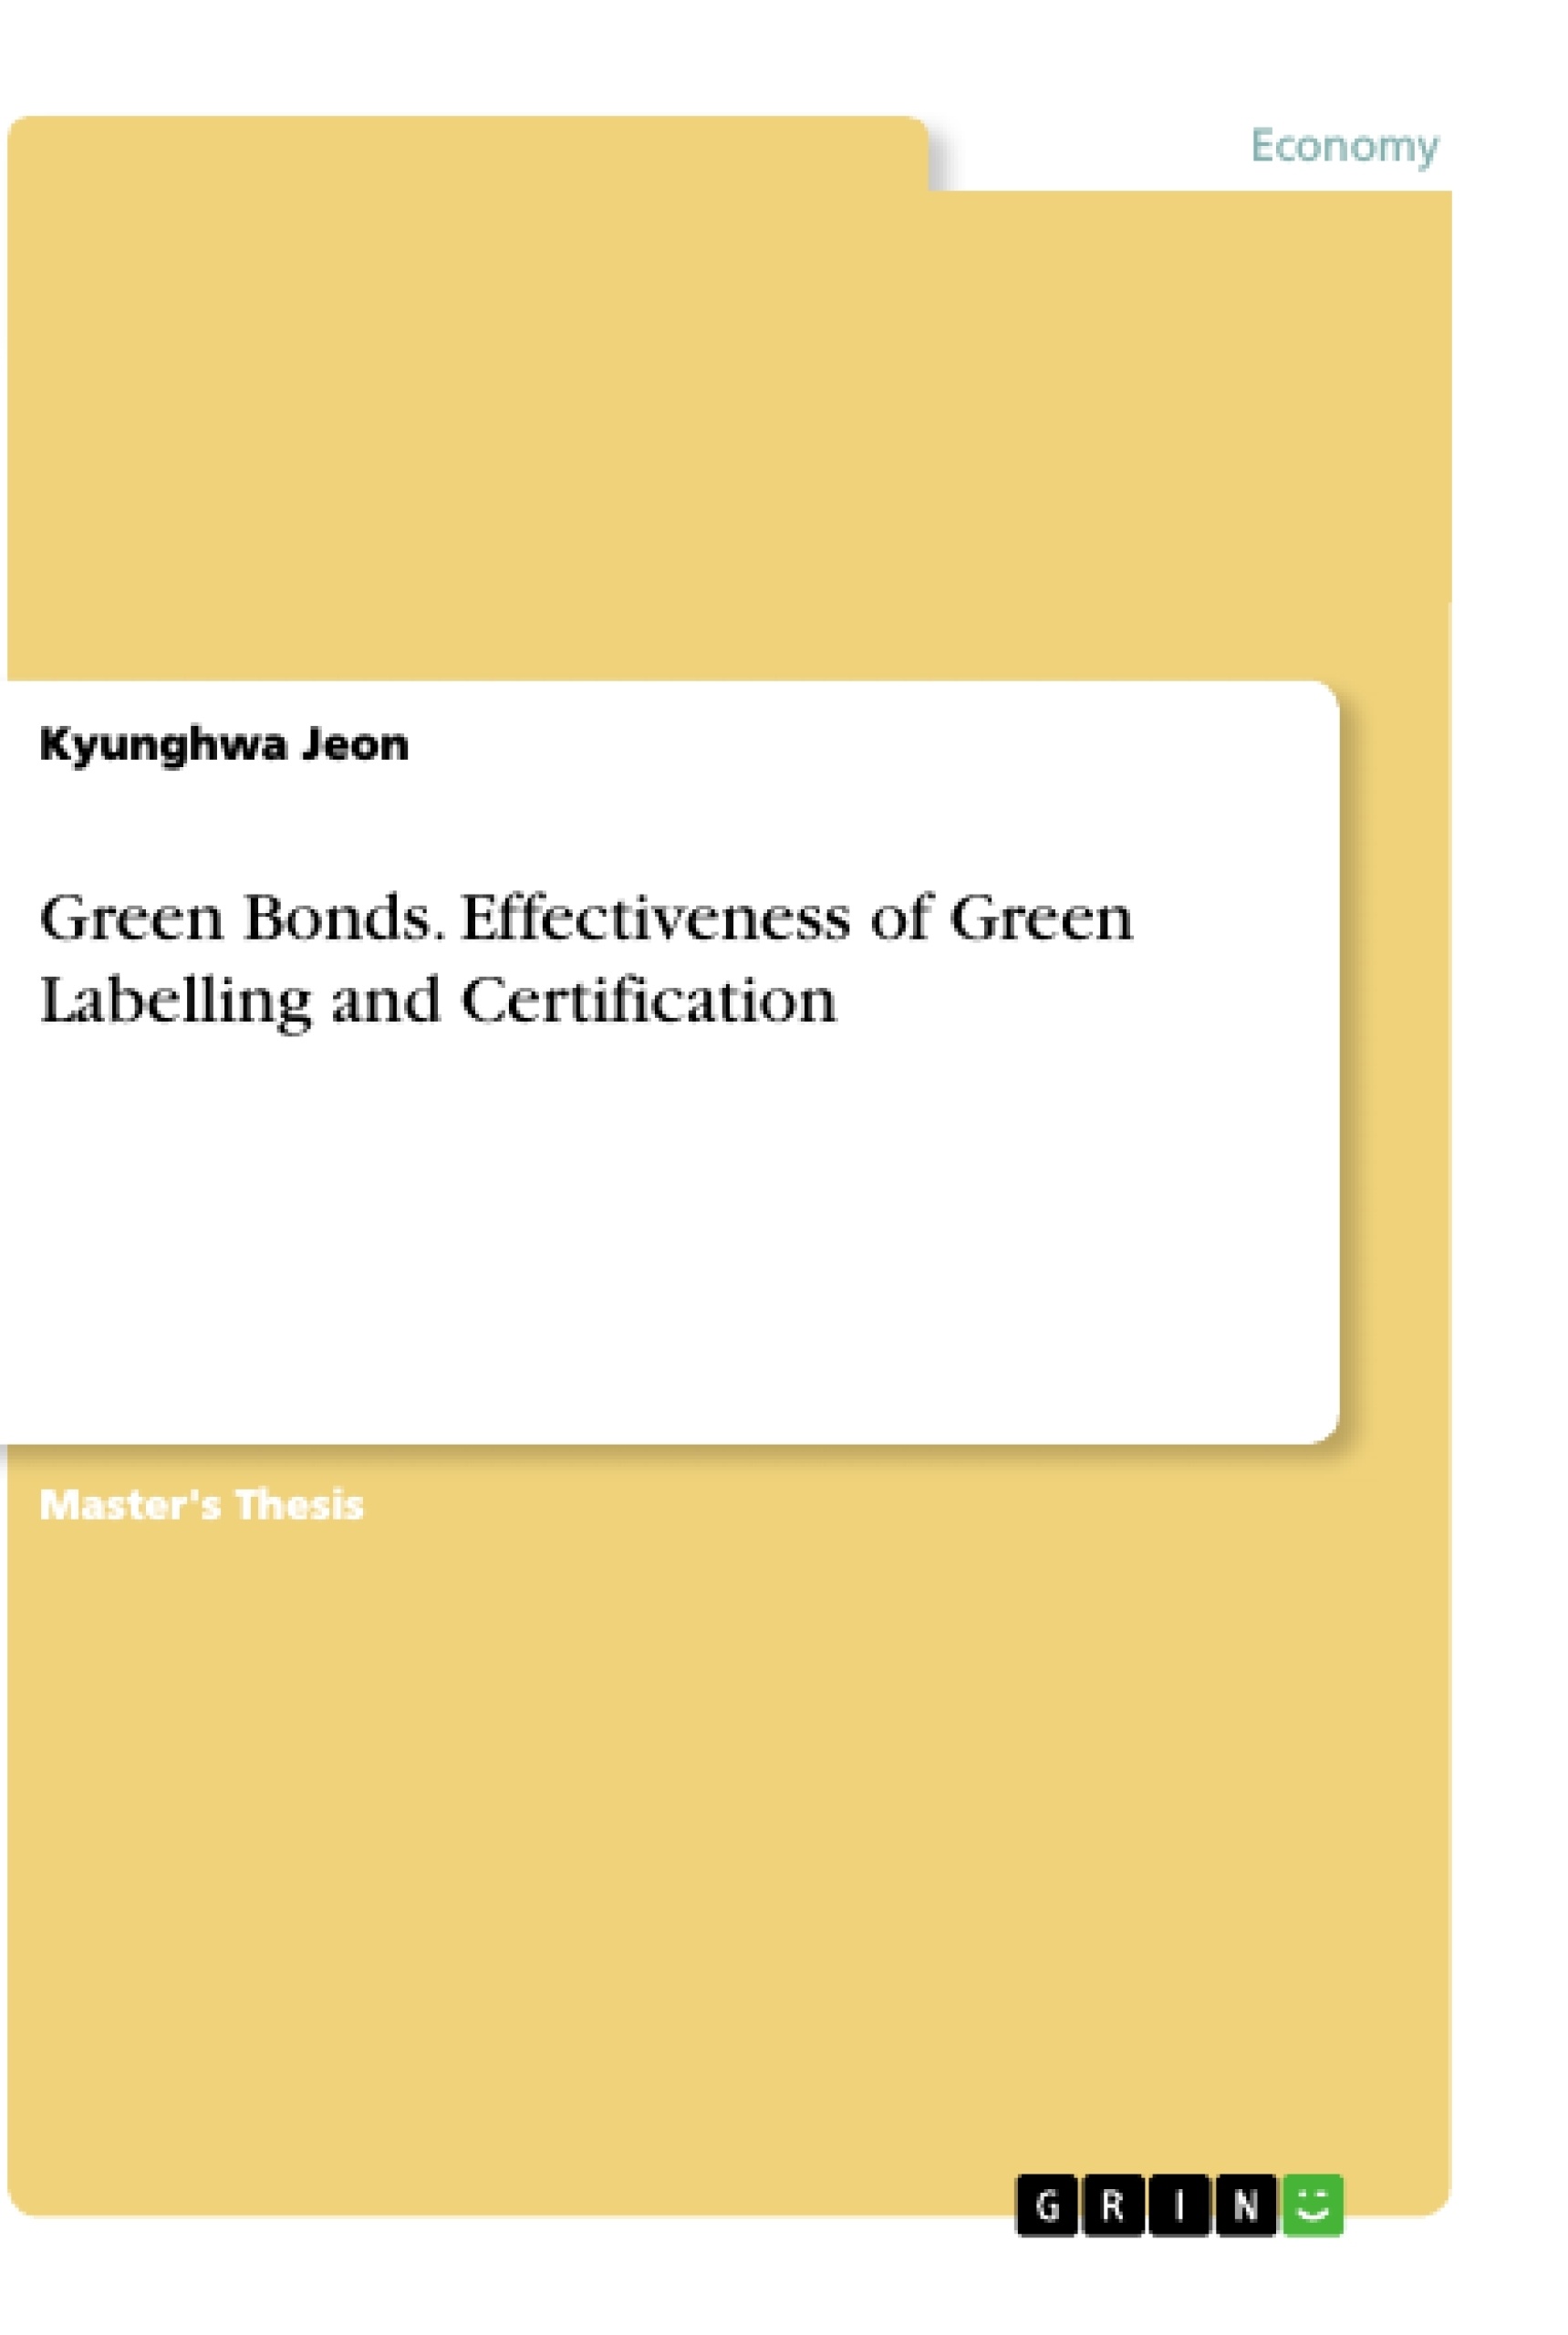 Title: Green Bonds. Effectiveness of Green Labelling and Certification